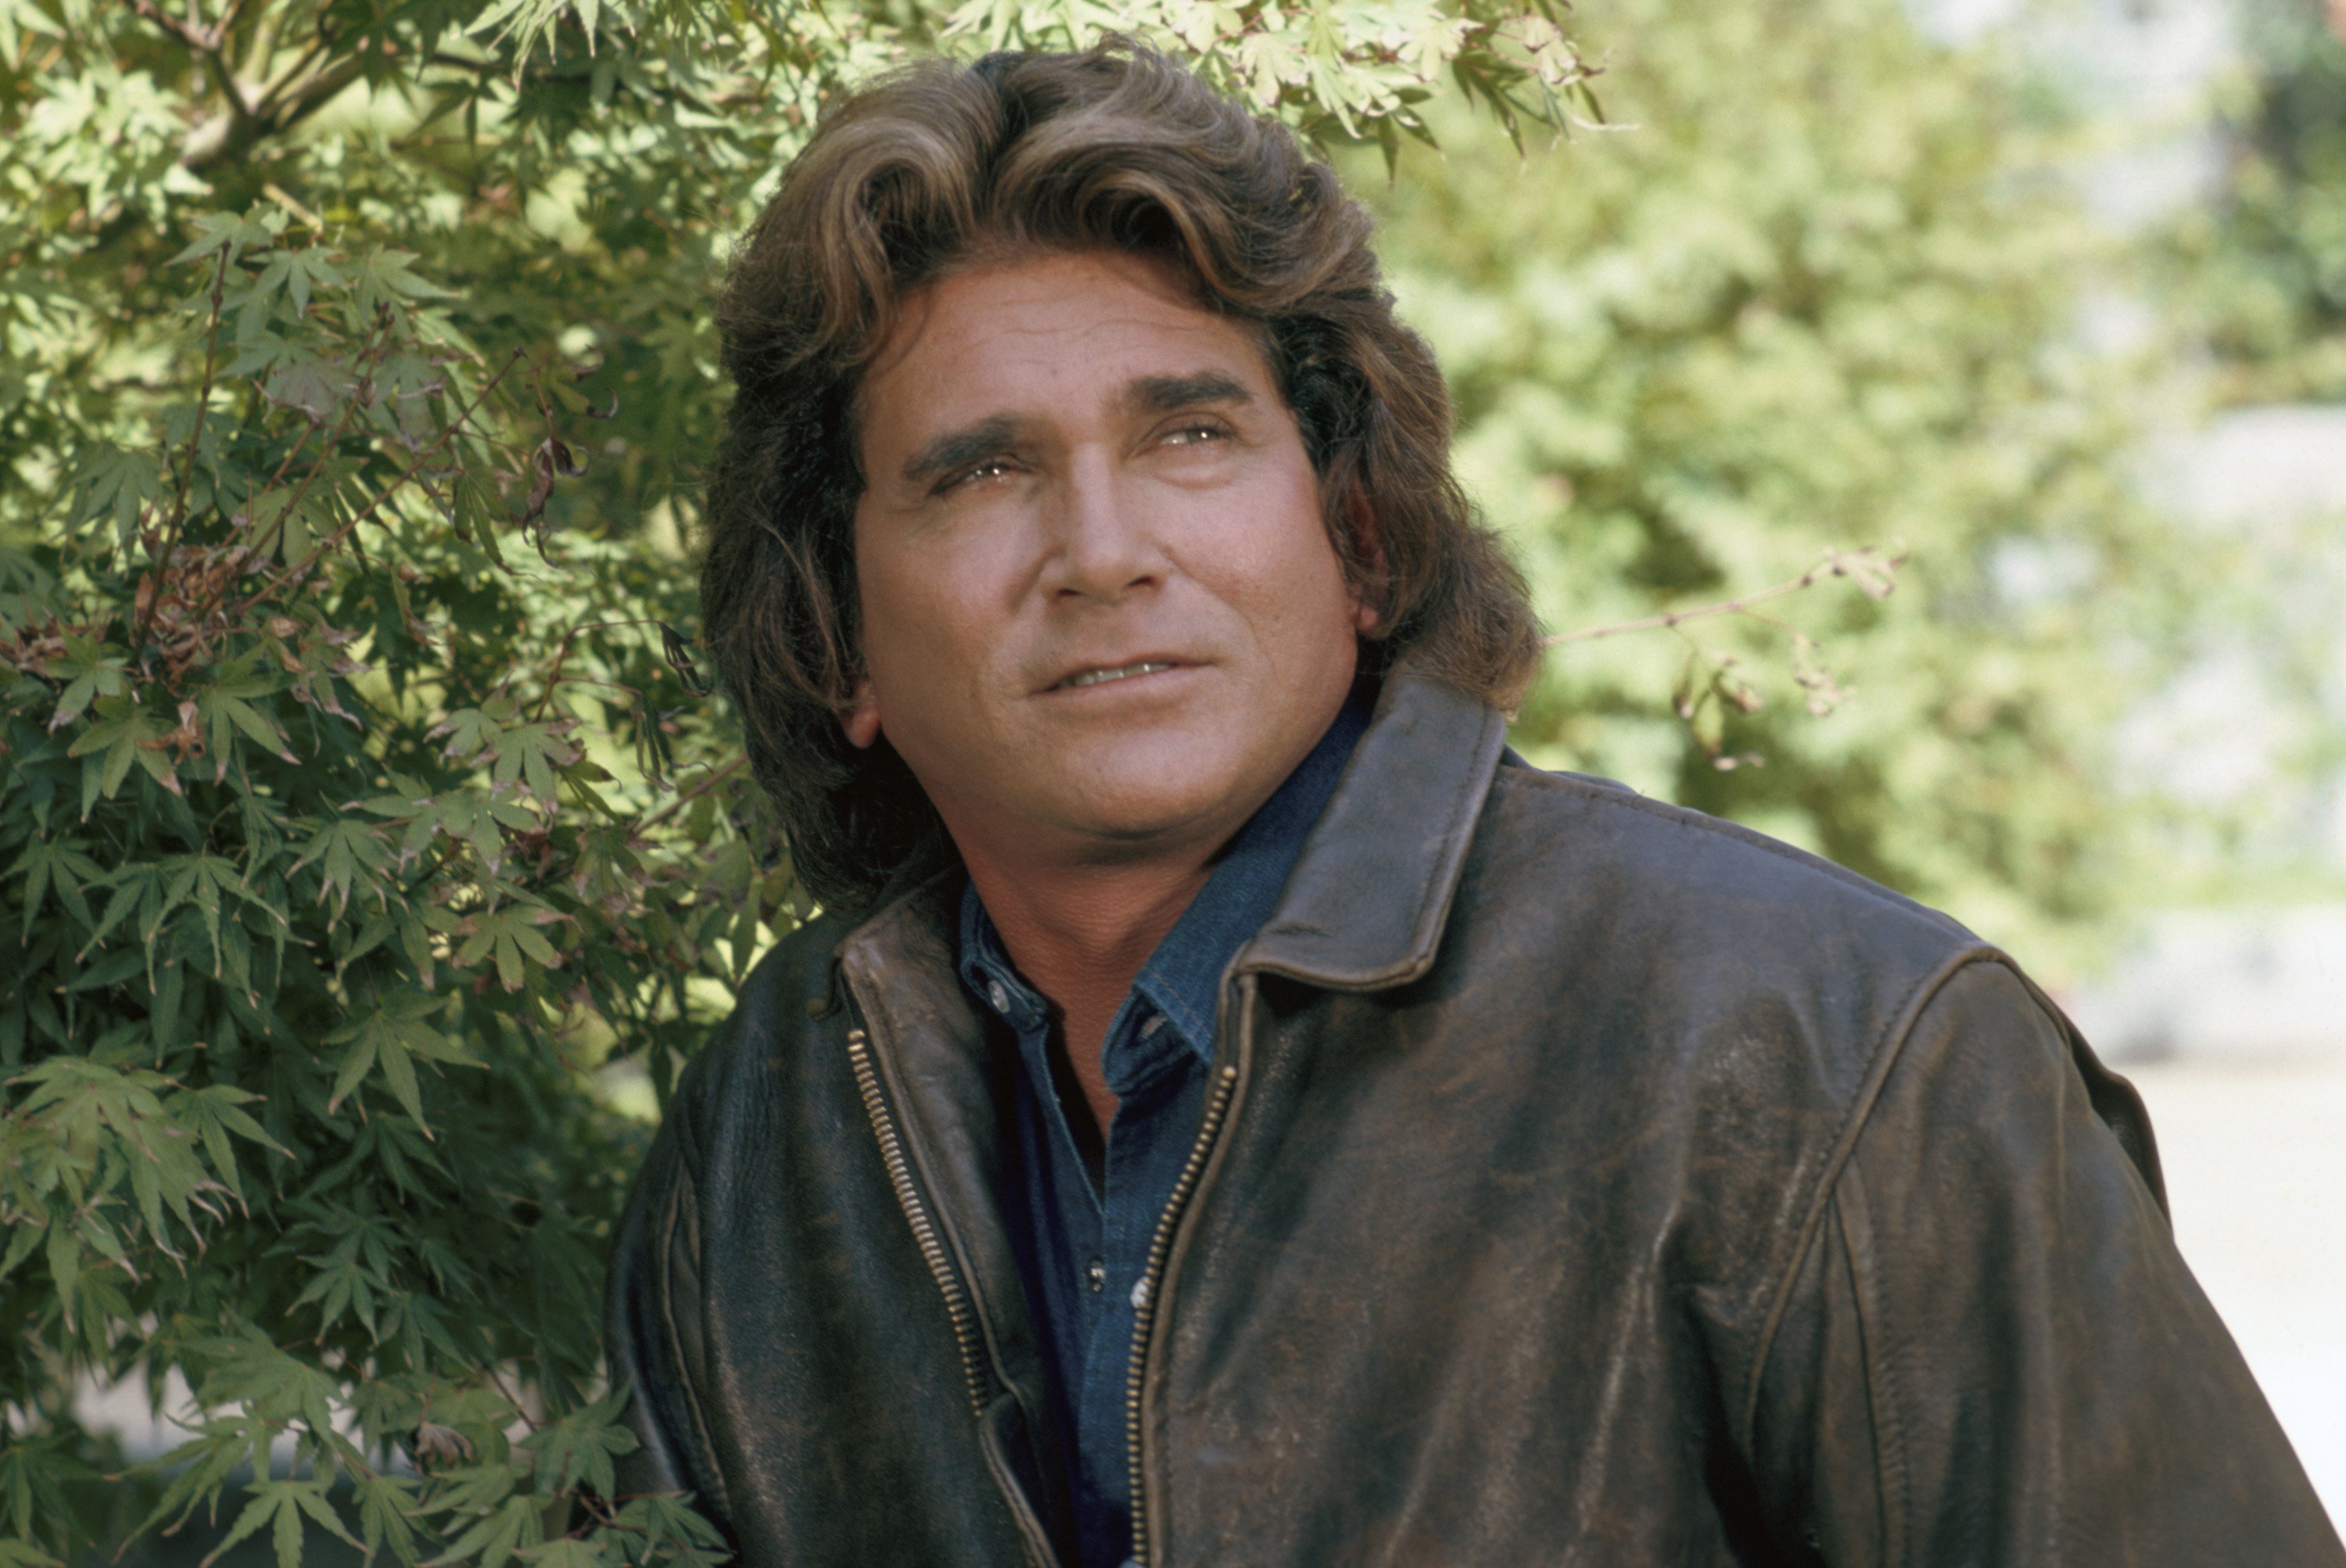 Michael Landon at an undisclosed location in 1985 | Source: Getty Images